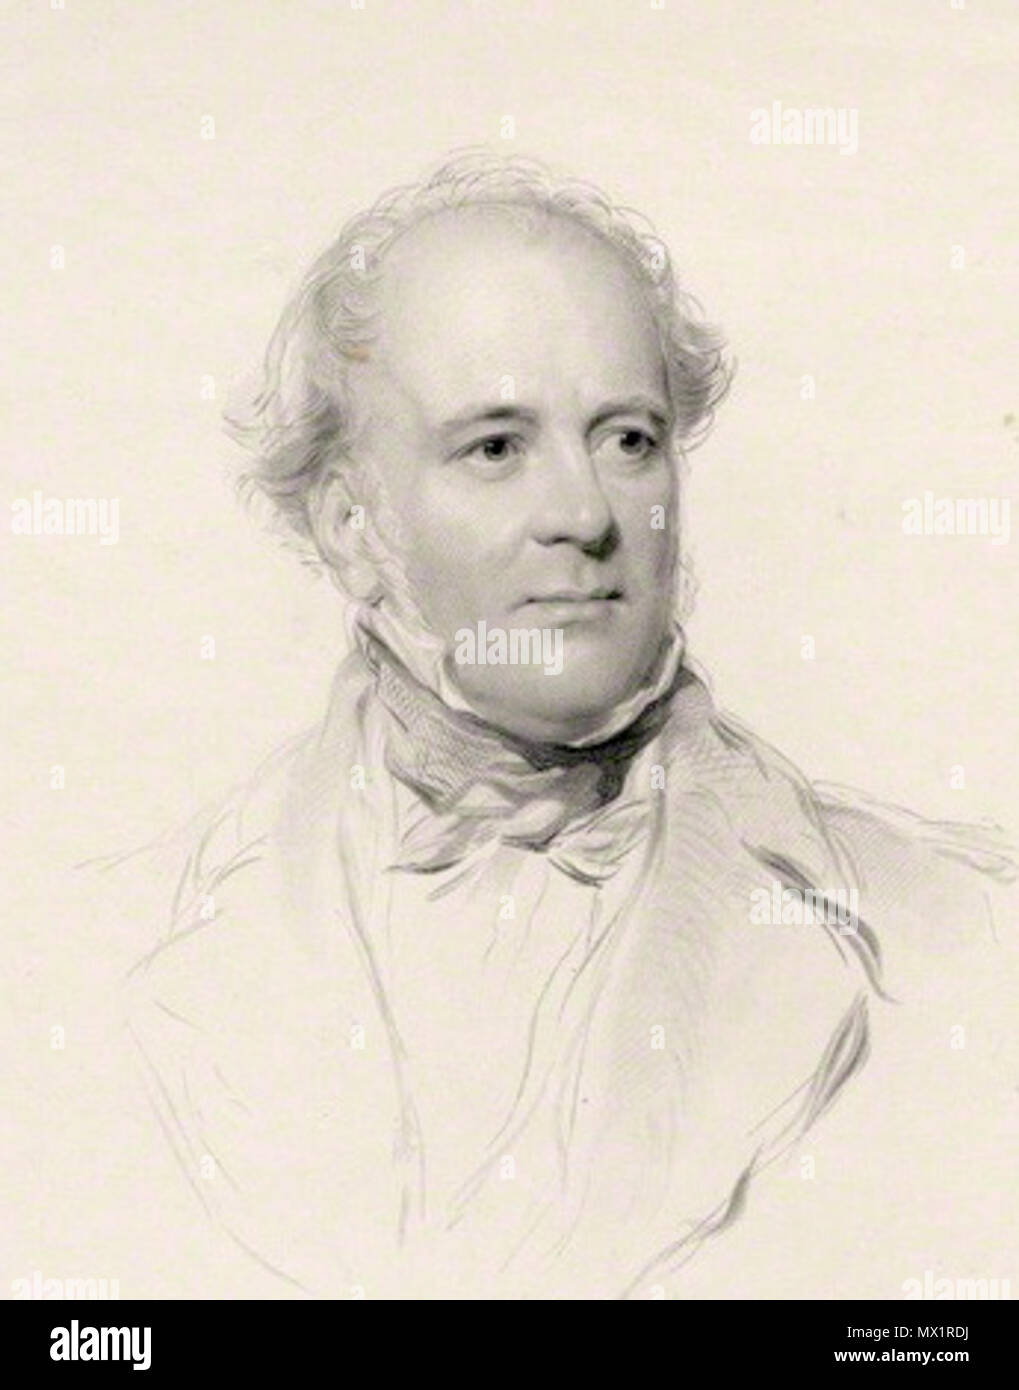 . English: Andrew Rutherfurd, Lord Rutherfurd (1791-1854) . circa 1852. possibly by Frederick Christian Lewis, after George Richmond 534 LordRuterfurd Stock Photo